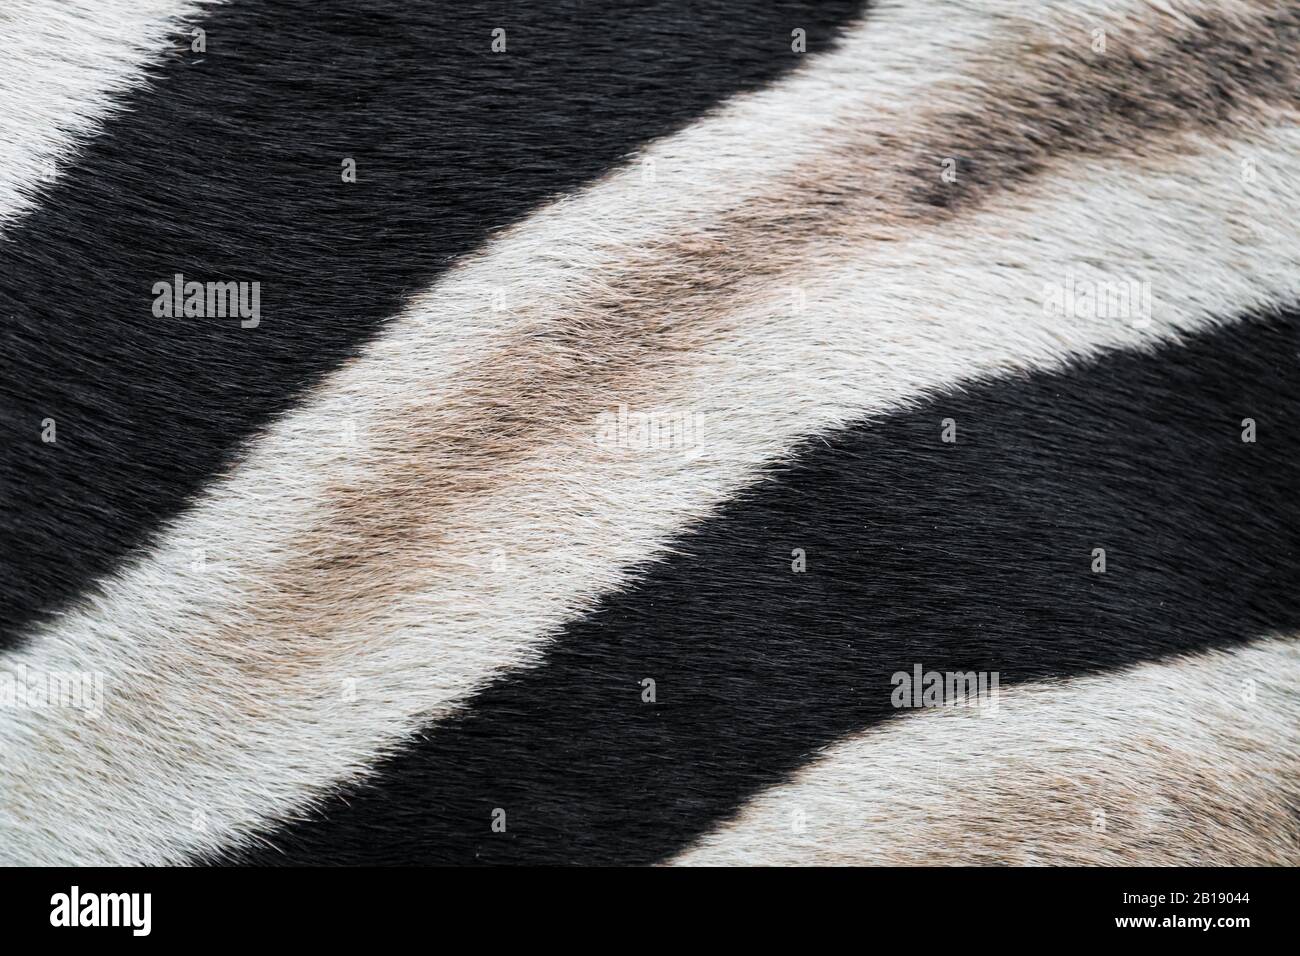 closeup, macro of zebra skin, fur showing black and white stripes and details of pattern concept abstract animal nature of wildlife in Africa Stock Photo